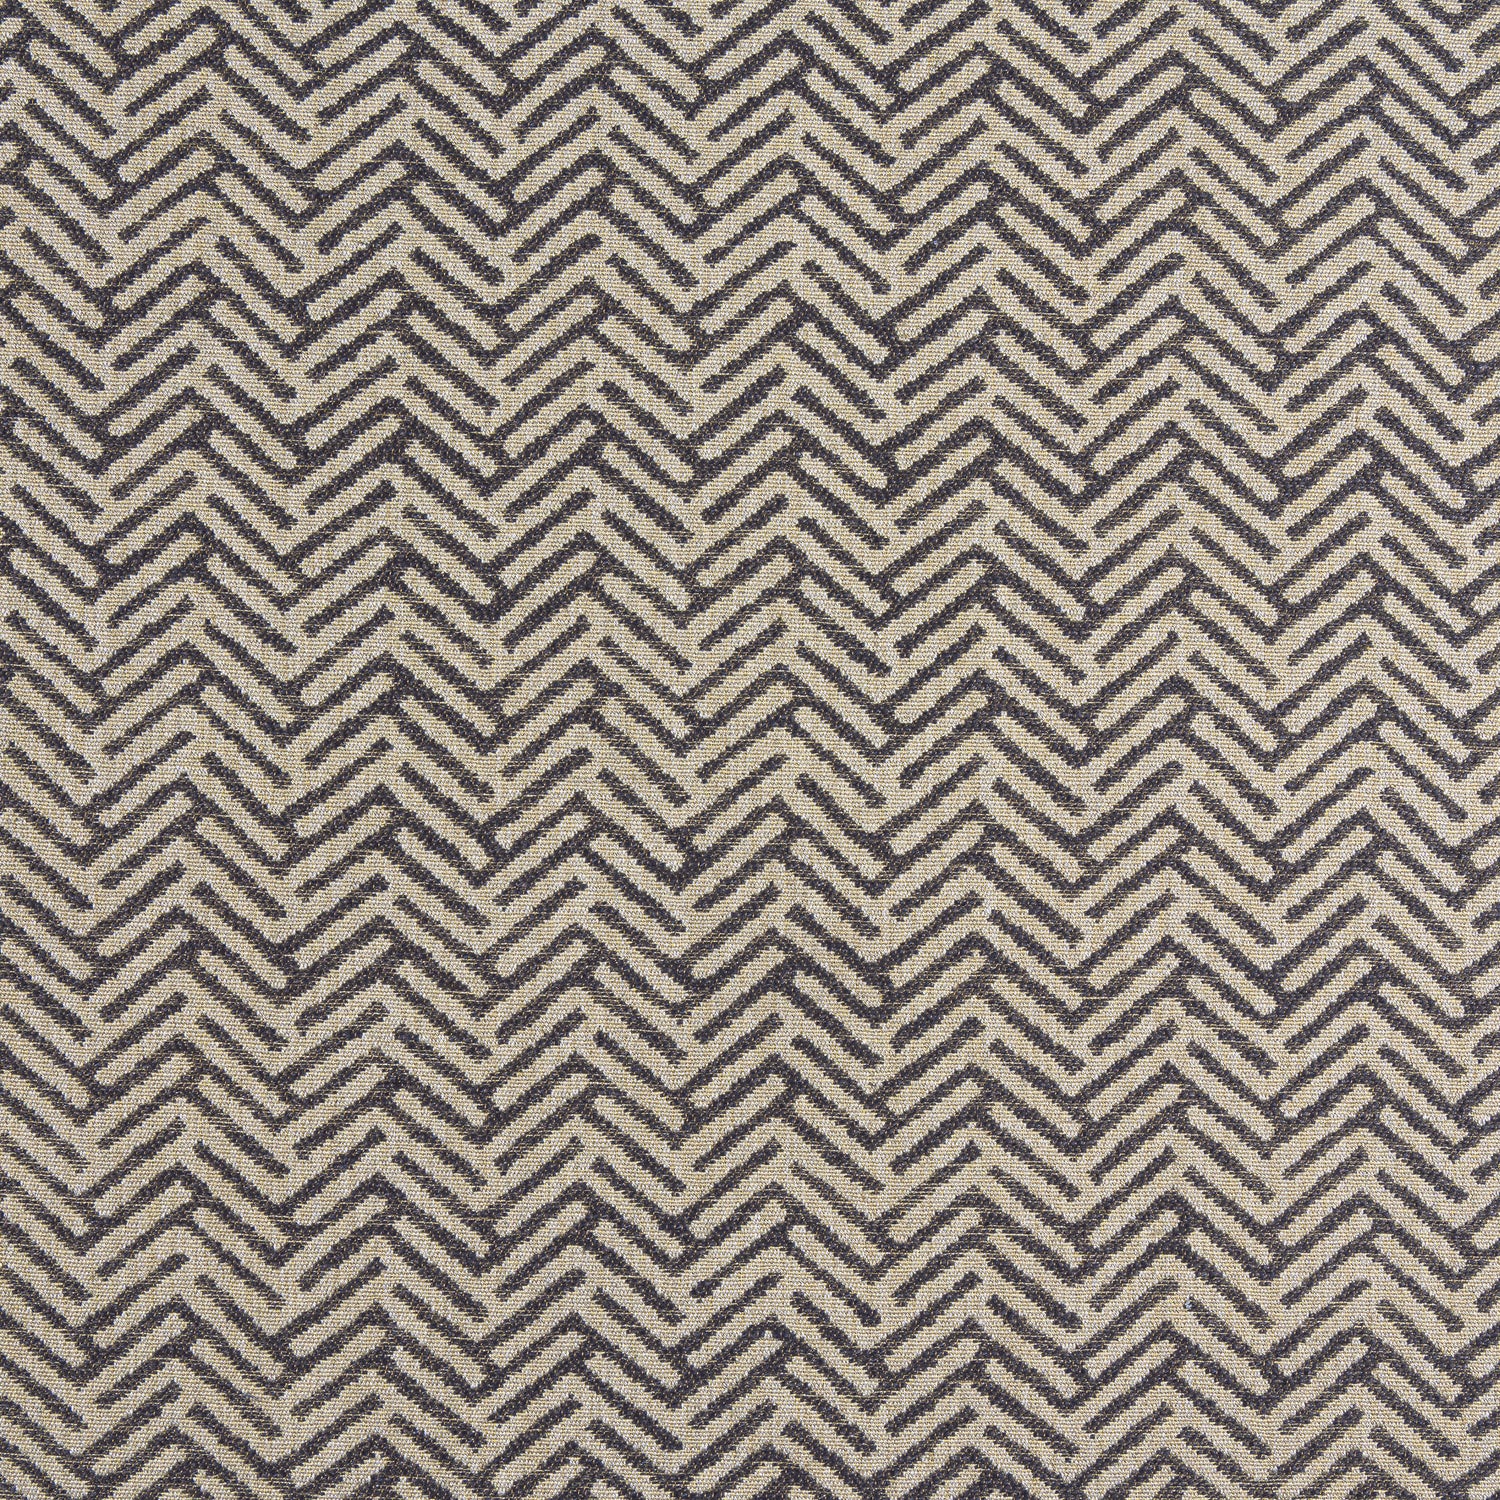 Varenna fabric in smoke color - pattern number W8114 - by Thibaut in the Sereno collection